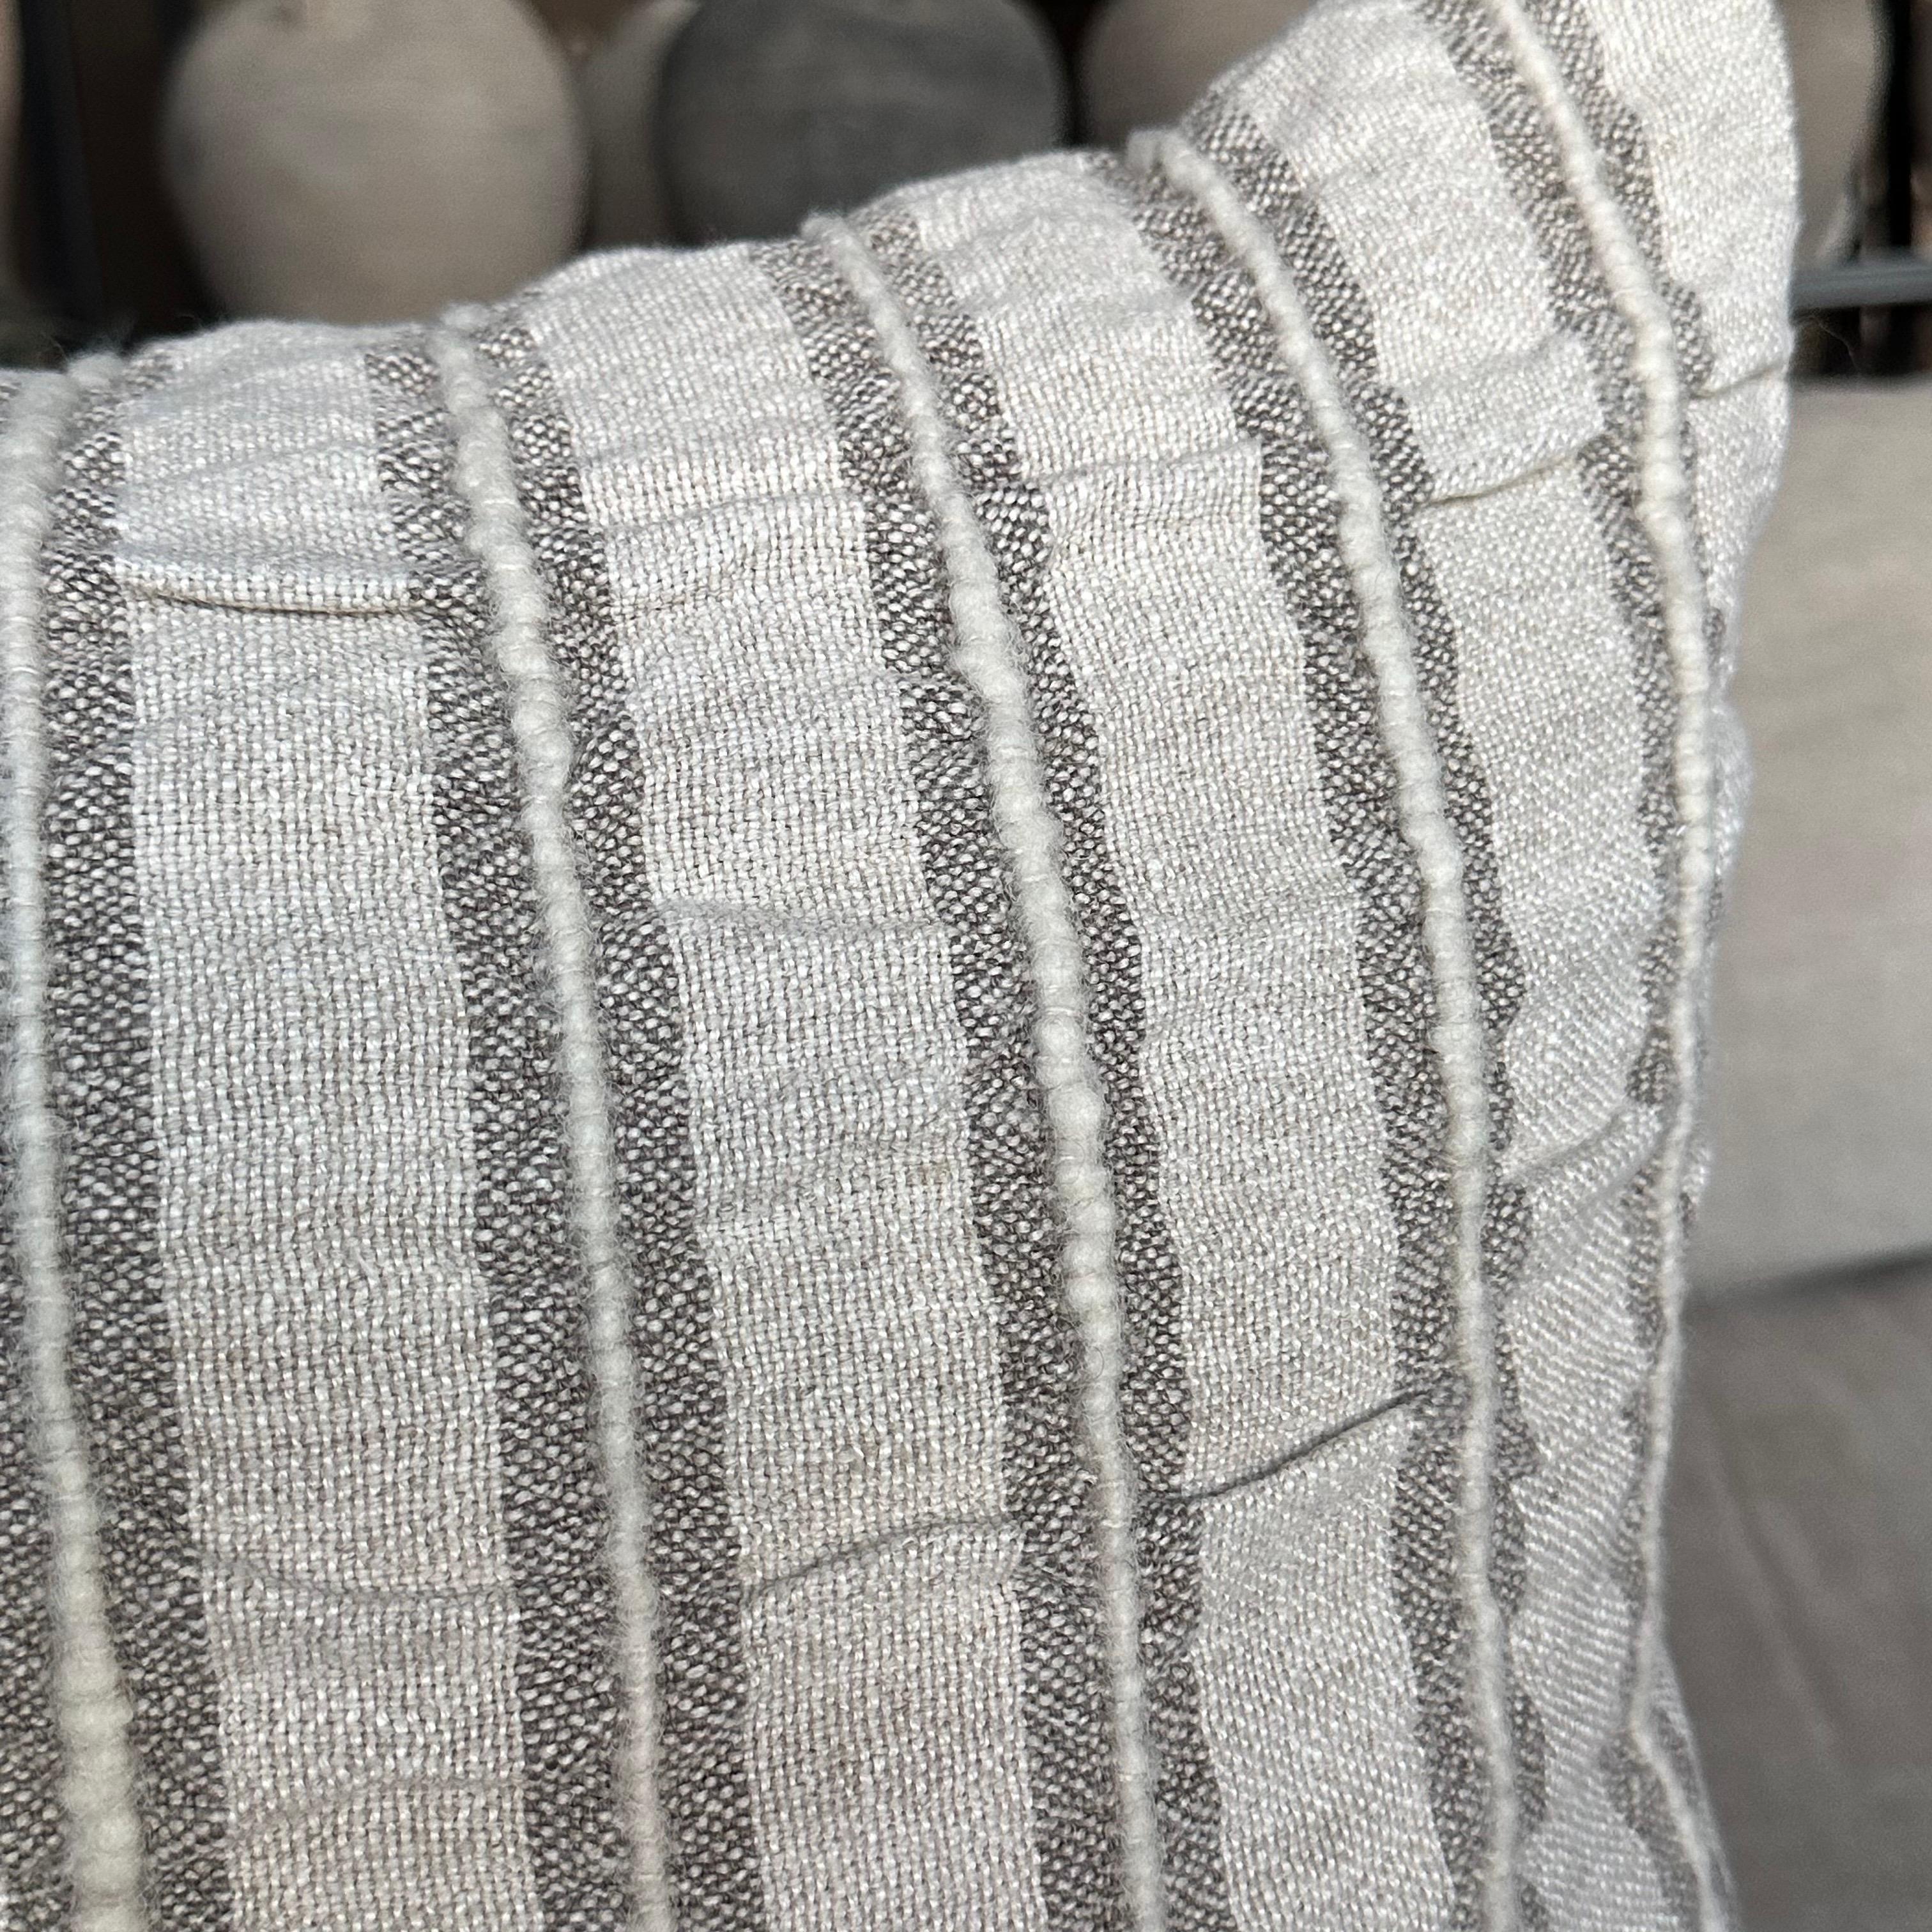 Linen and Wool Stripe Pillow
Nubby textured linen with woven wool stripes. 
Color: Gray / White
Hidden Zipper closure
Includes down / feather insert
Size: 15x24
Care: For best results dry cleaning is recommended.
Soft to the touch, handmade in